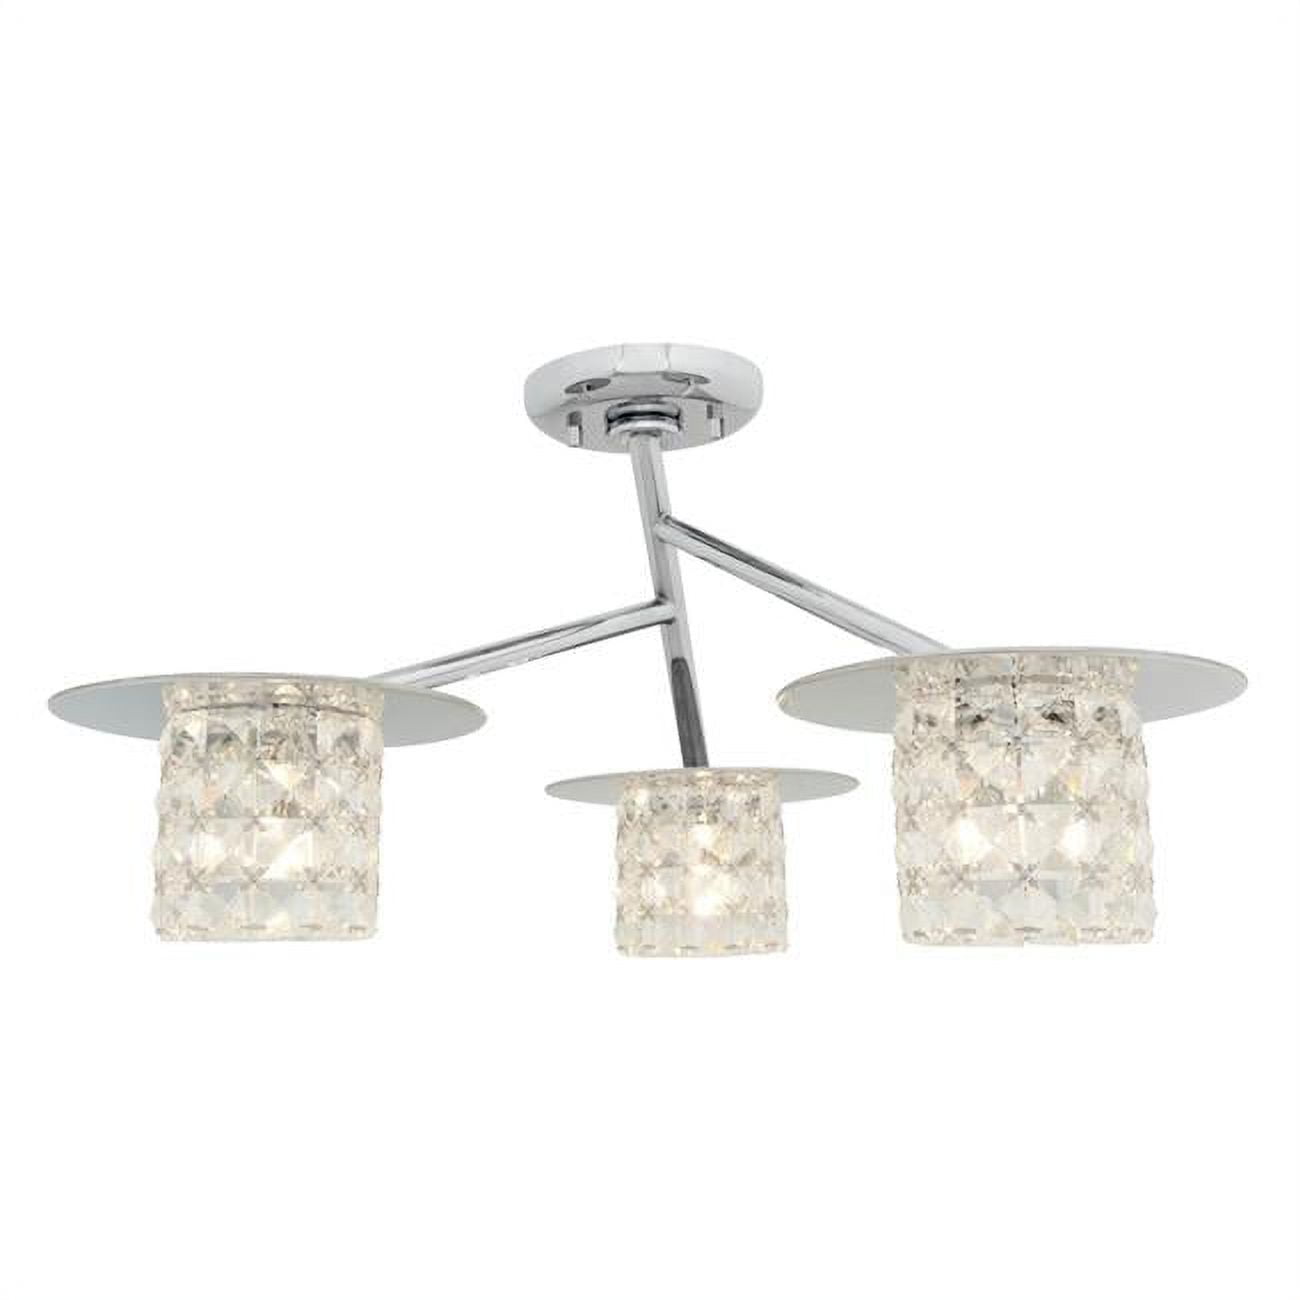 23924-ch-ccl Prizm Three Light Semi Flush With Clear Crystal Glass Shade, Chrome Finish